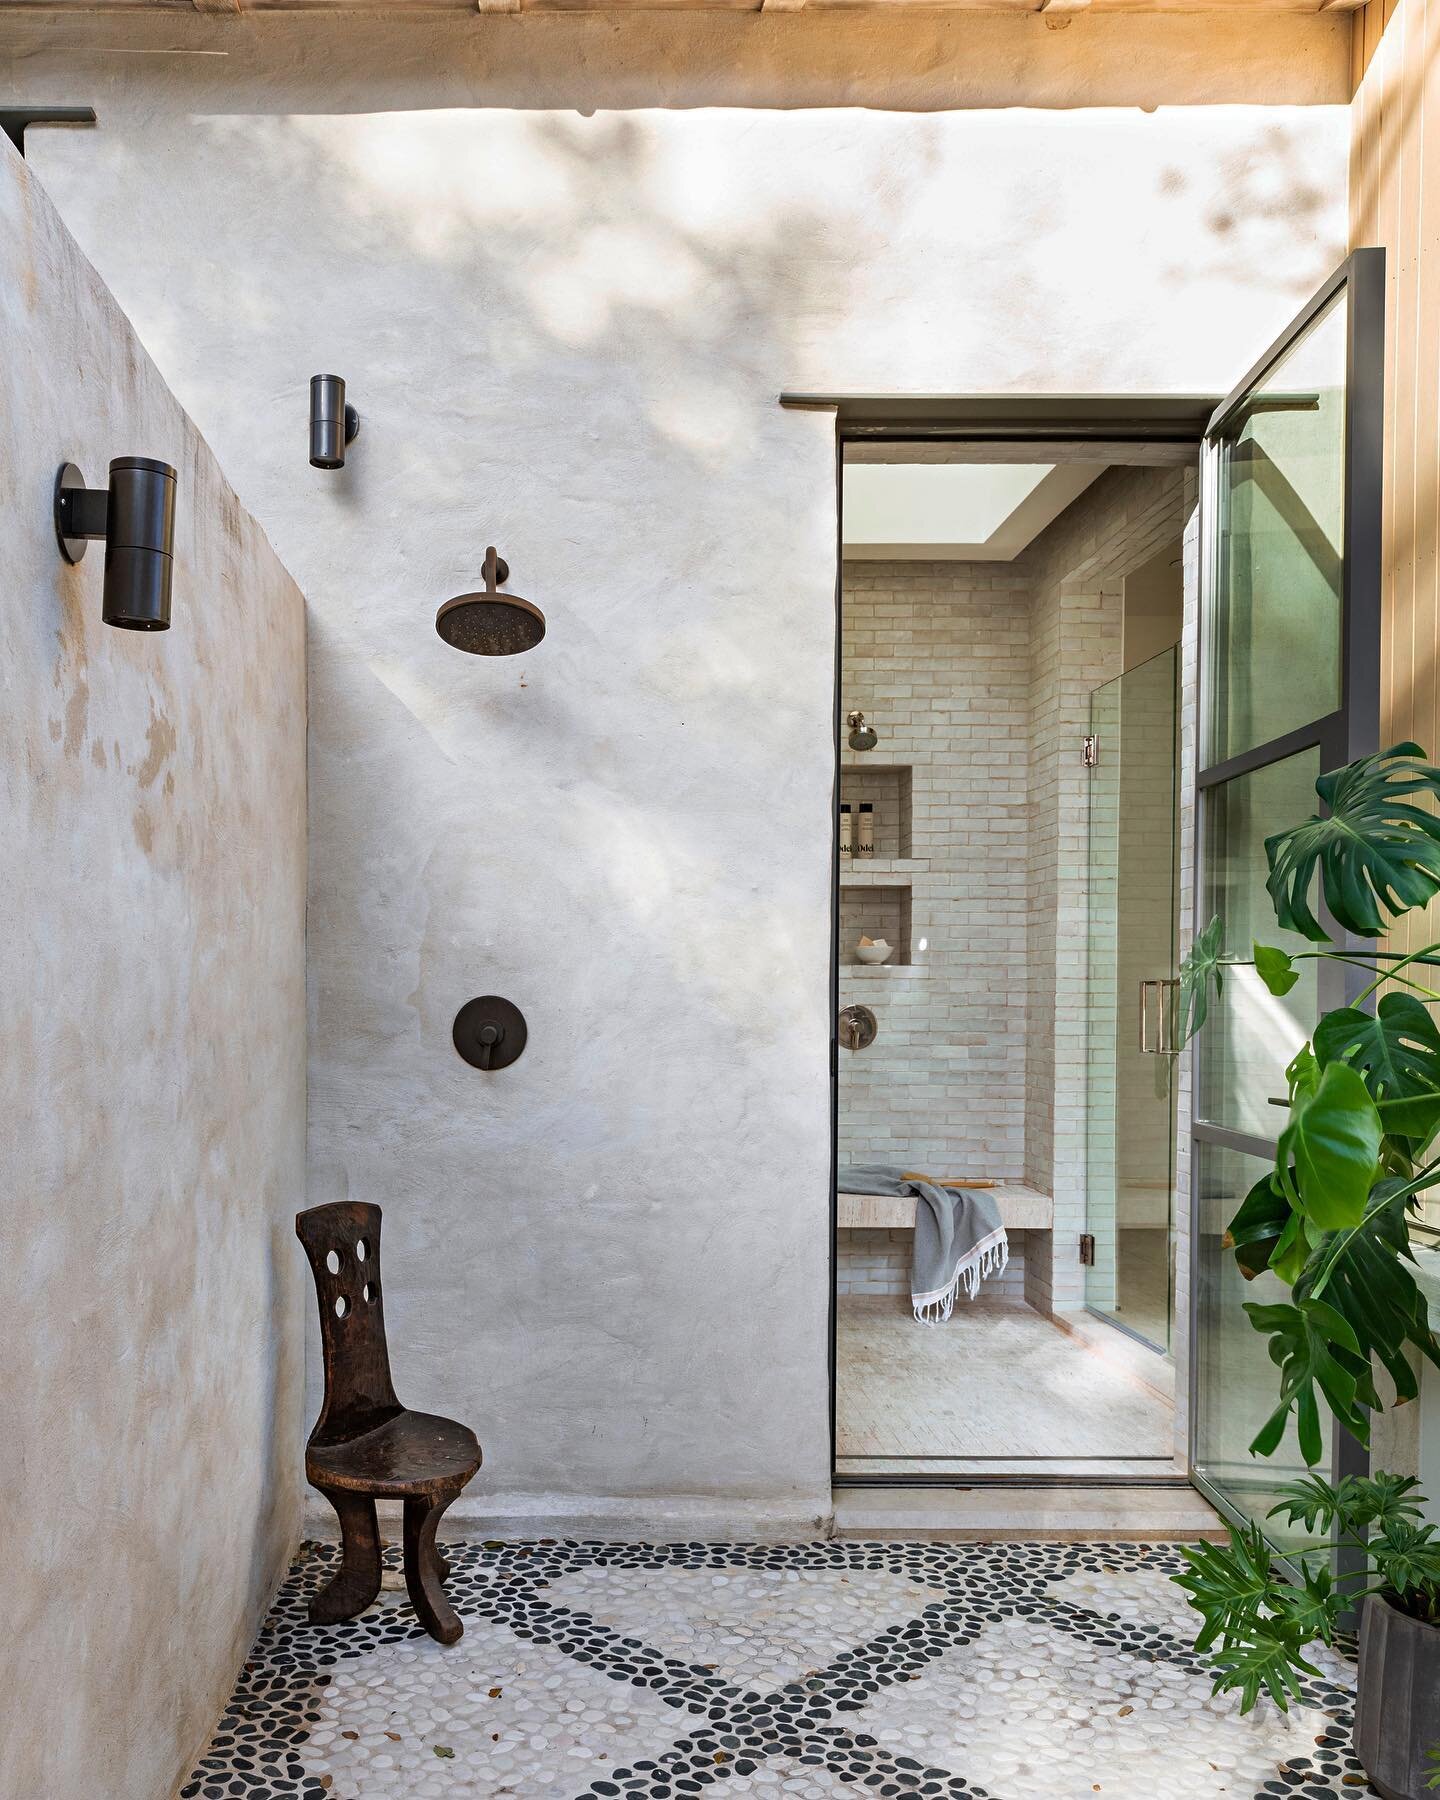 Gorgeous courtyard and outdoor shower off the primary bathroom suite at our Hatley project 🌿 Thank you to @dotdashmeredith and @betterhomesandgardens for the lovely feature
📷: @juliesoefer 
Architecture: @ryanstreetarchitects 
#studioseiders